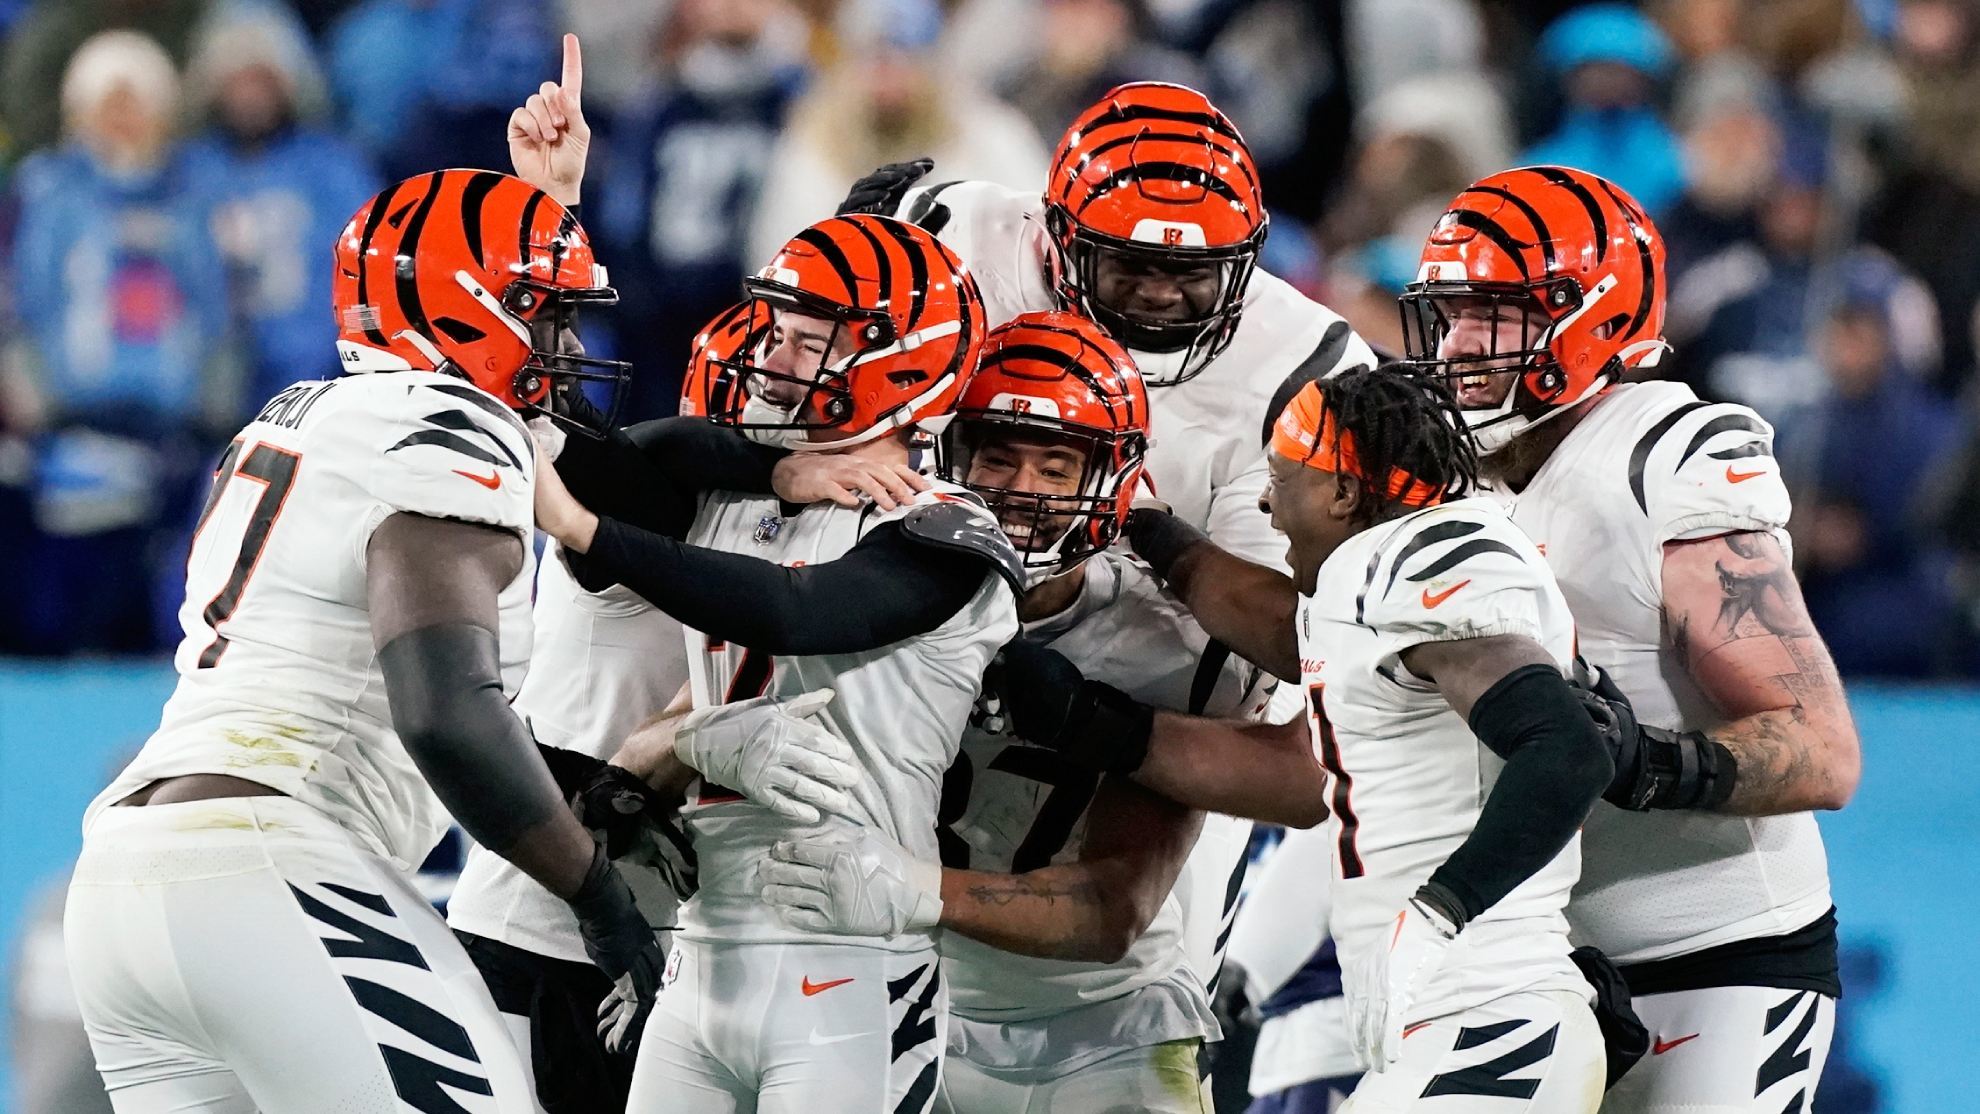 Bengals vs Chiefs: Injury report, history and picks